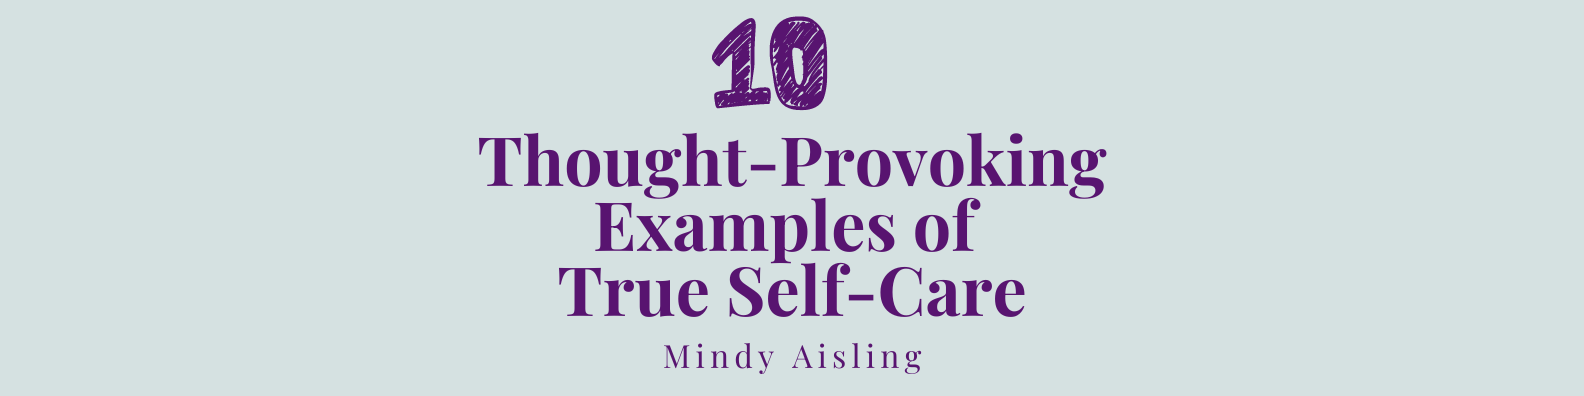 10 Thought-Provoking Examples of True Self-Care | Mindy Aisling